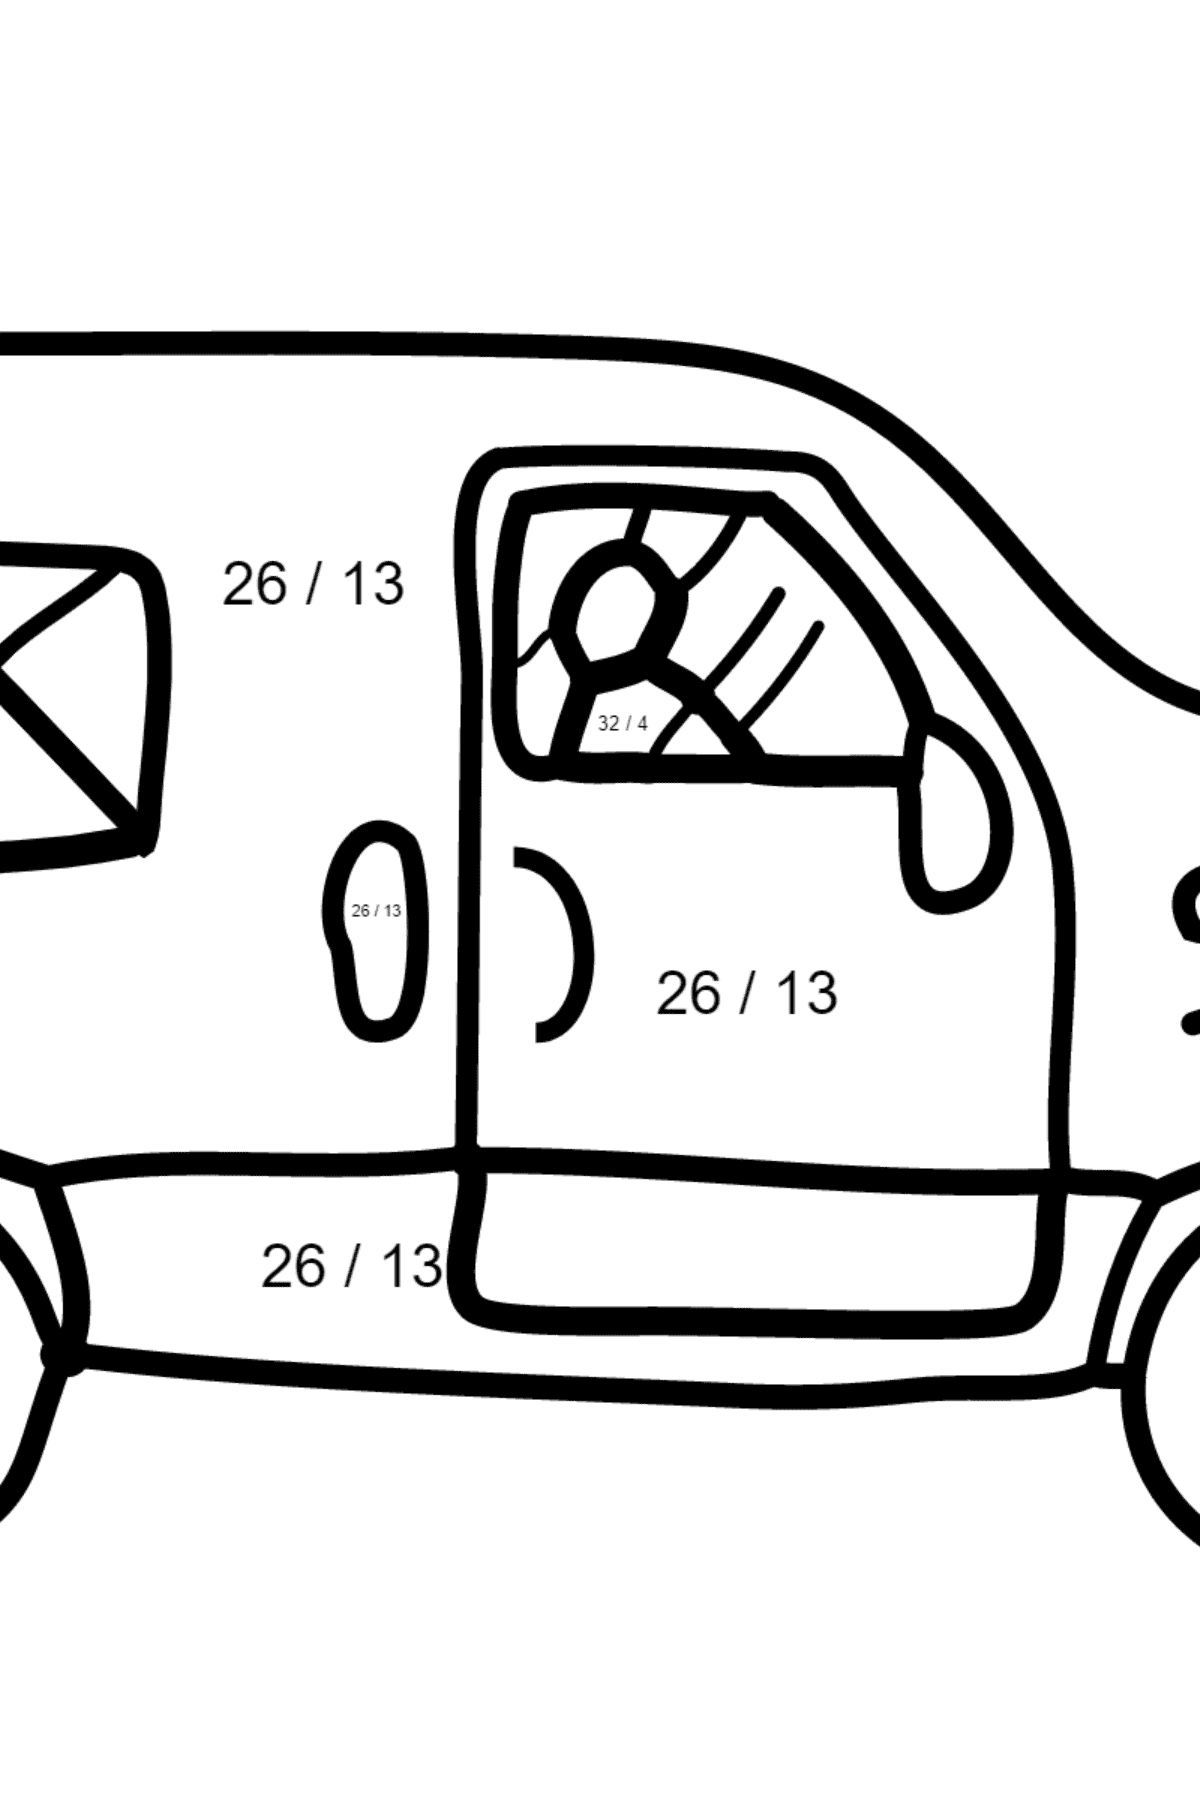 Coloring Page - A Car is Carrying Mail - Math Coloring - Division for Kids